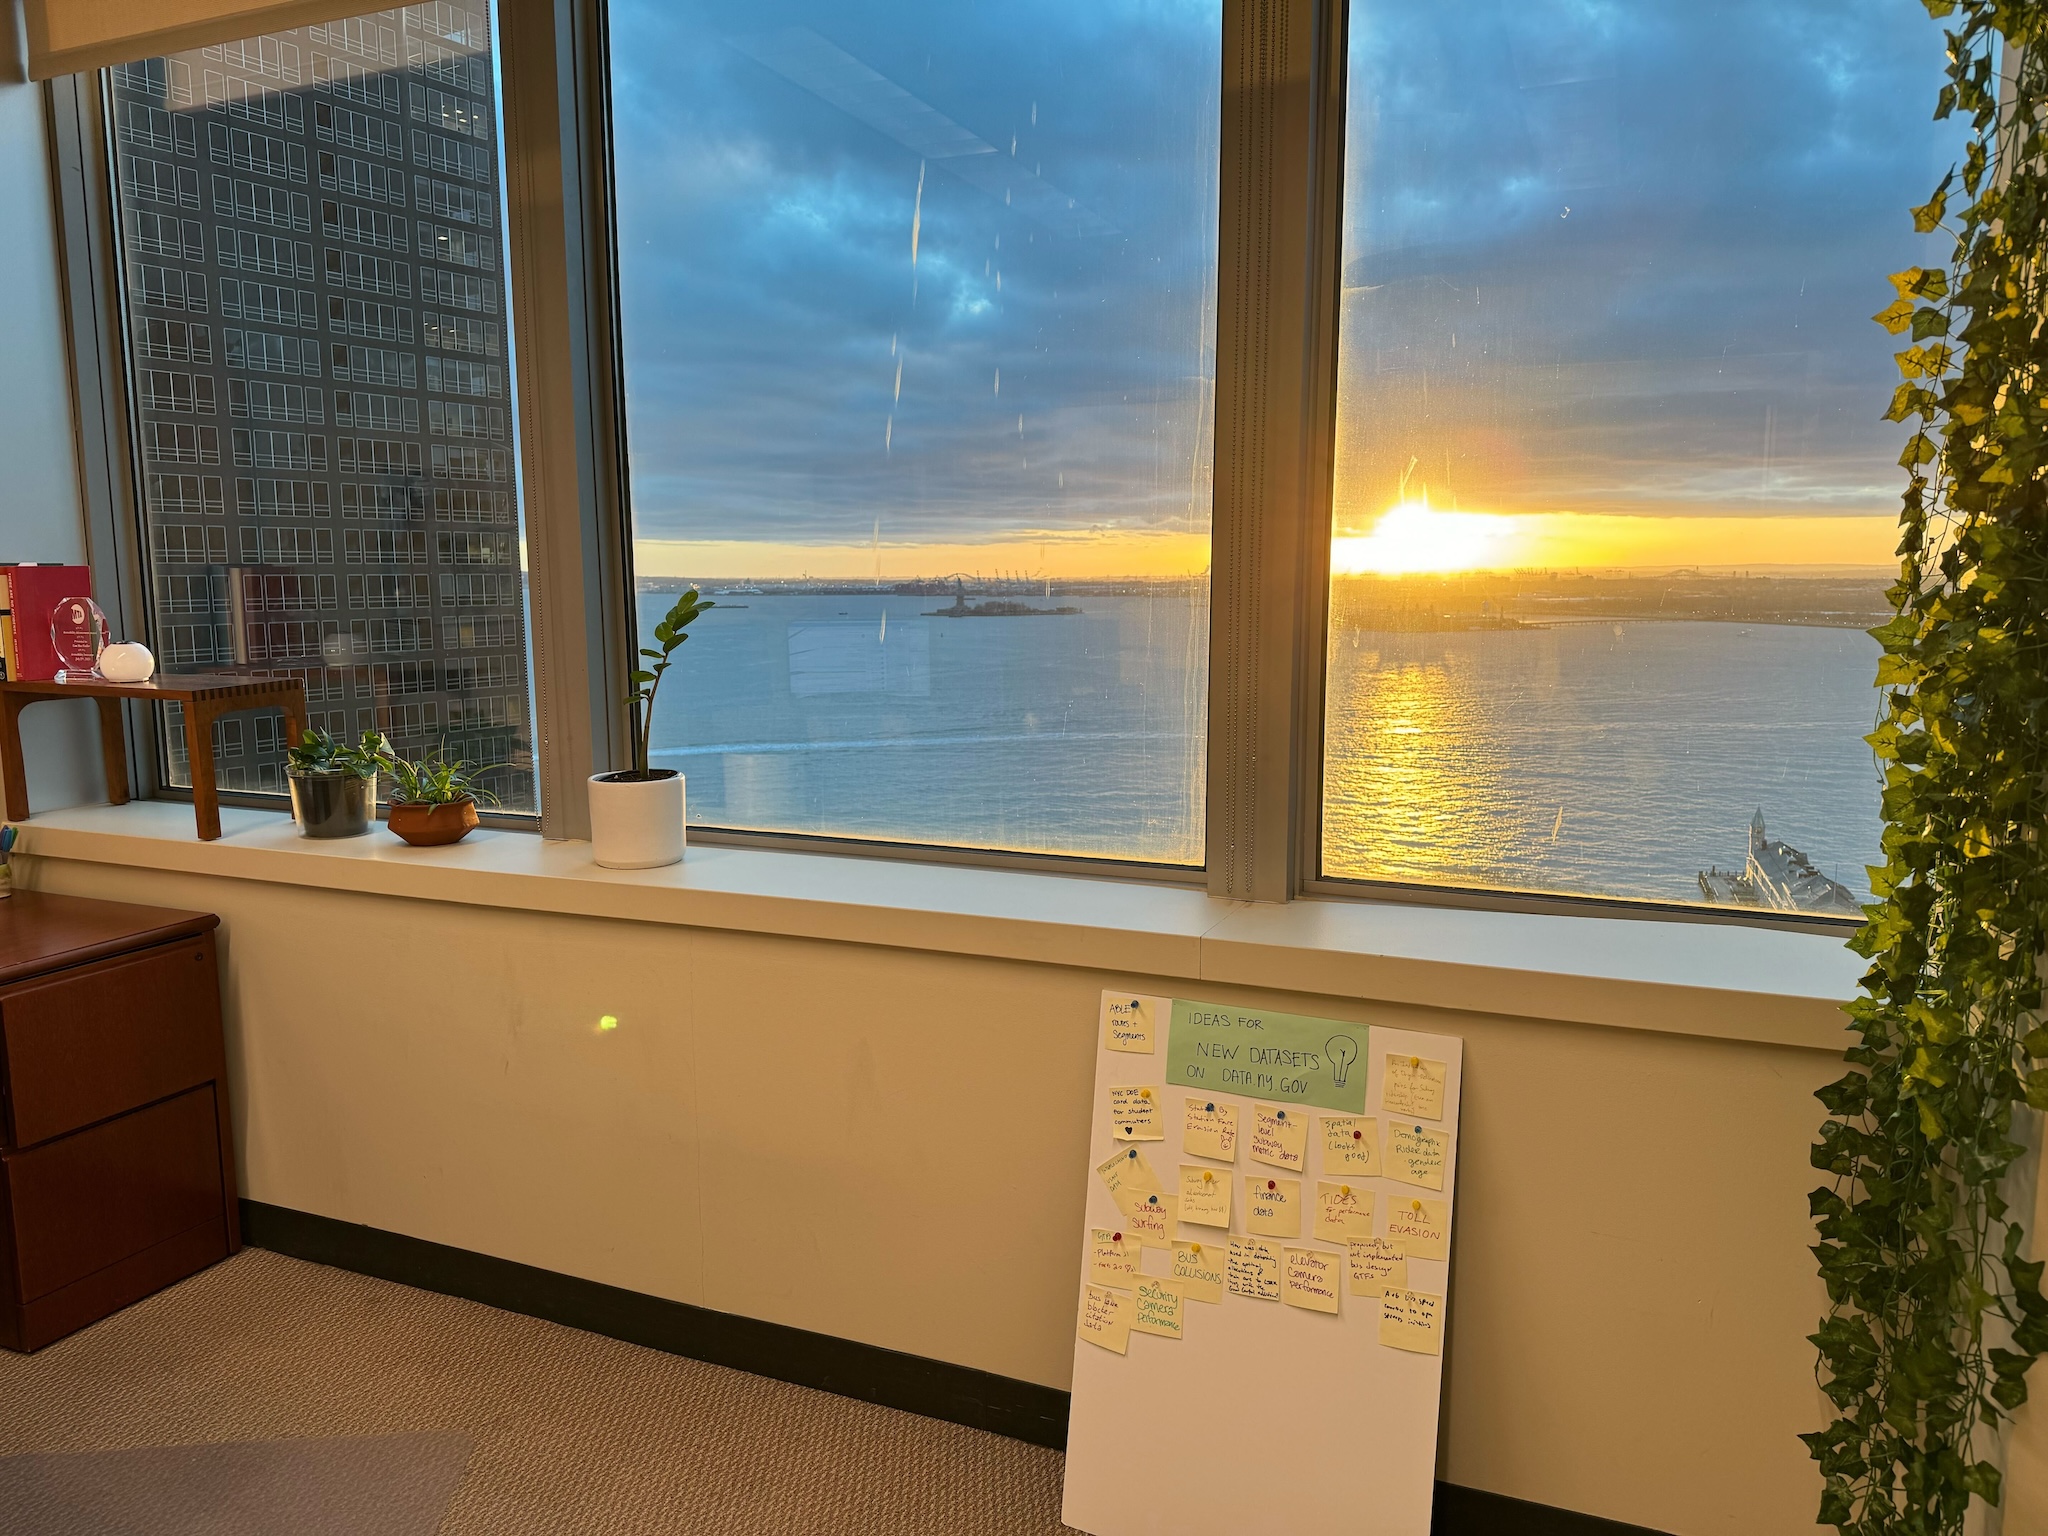 The sunset over the Statue of Liberty from inside an office